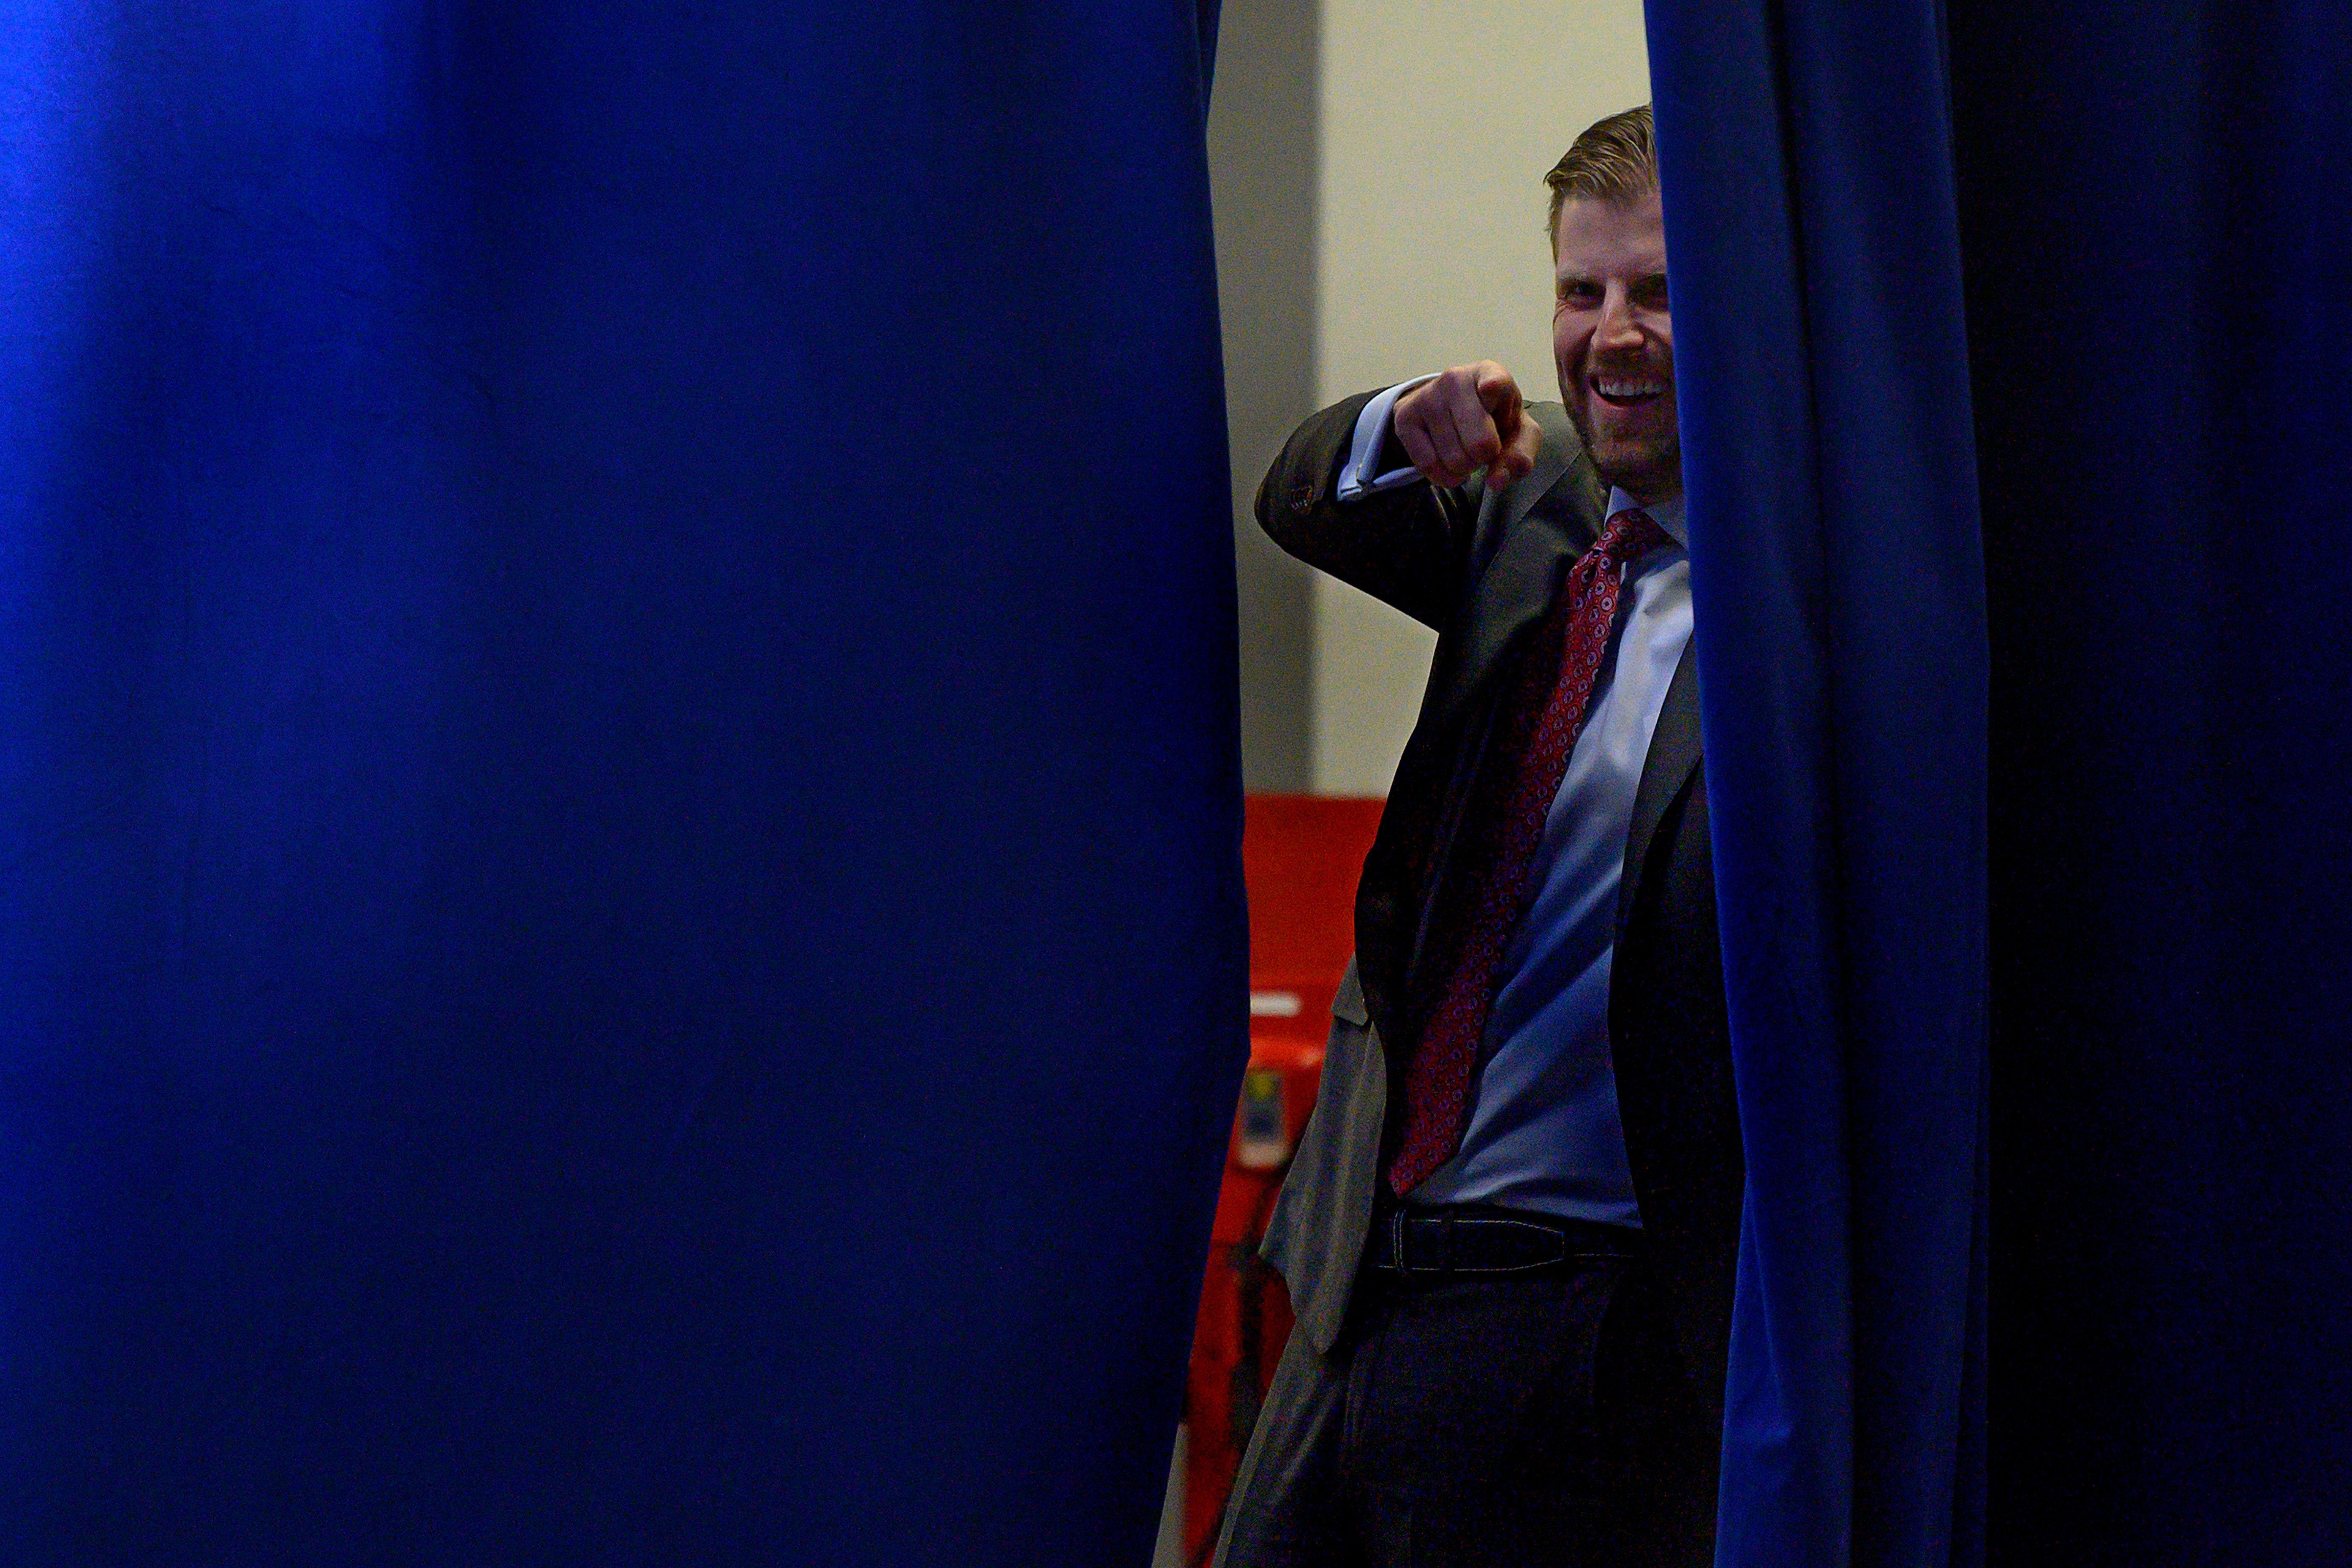 Eric Trump points from backstage prior to speaking during a press conference in Des Moines, IA, on February 3, 2020.